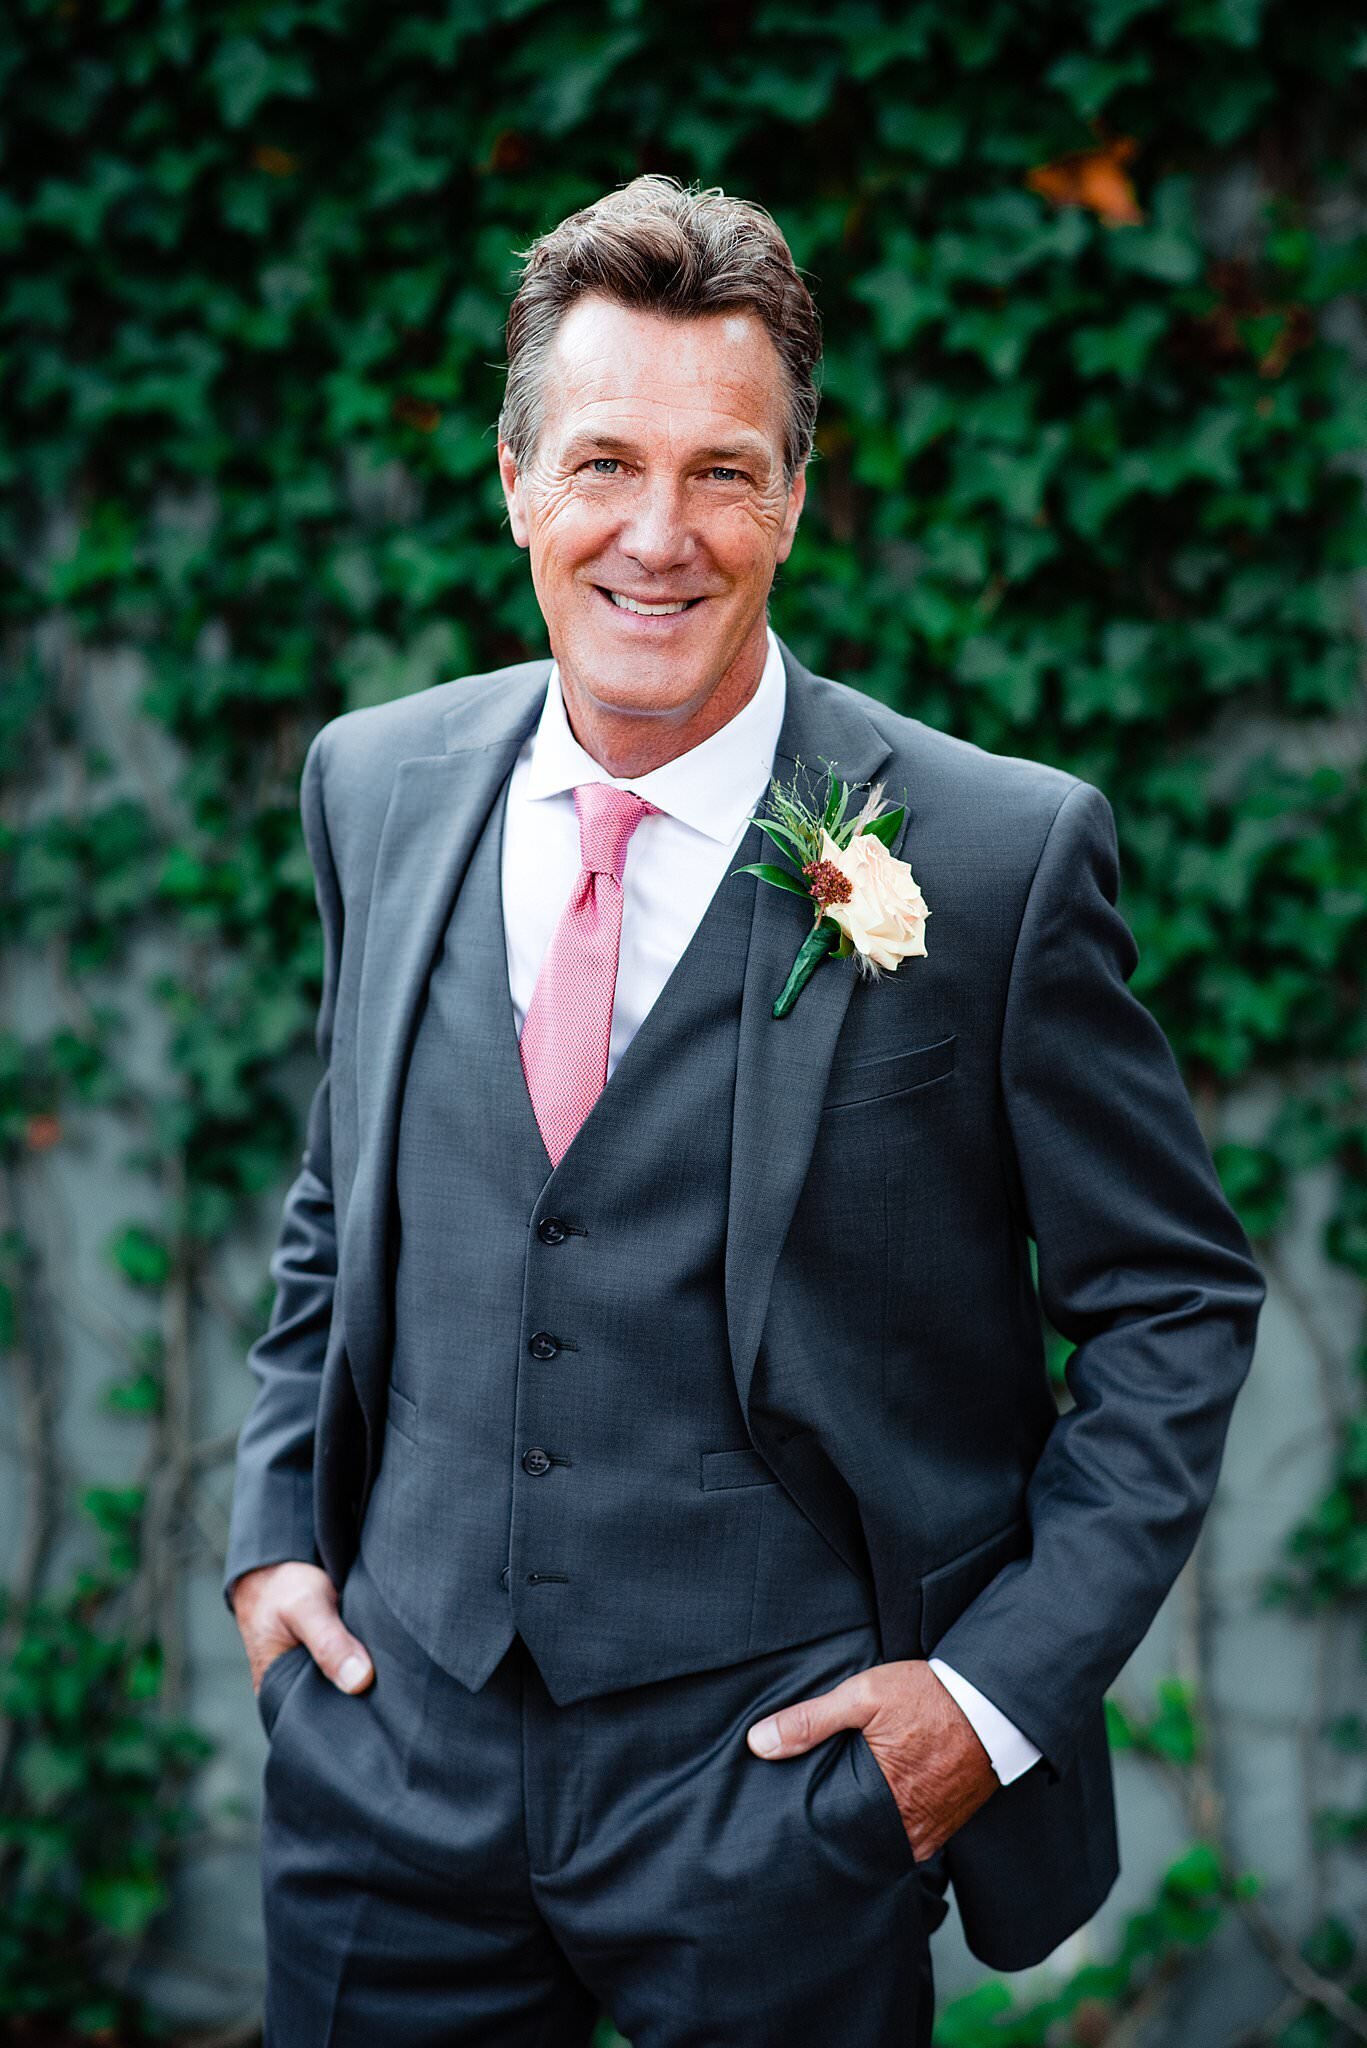 Groom wearing a grey suit and coral tie standing in front of an ivy covered wall